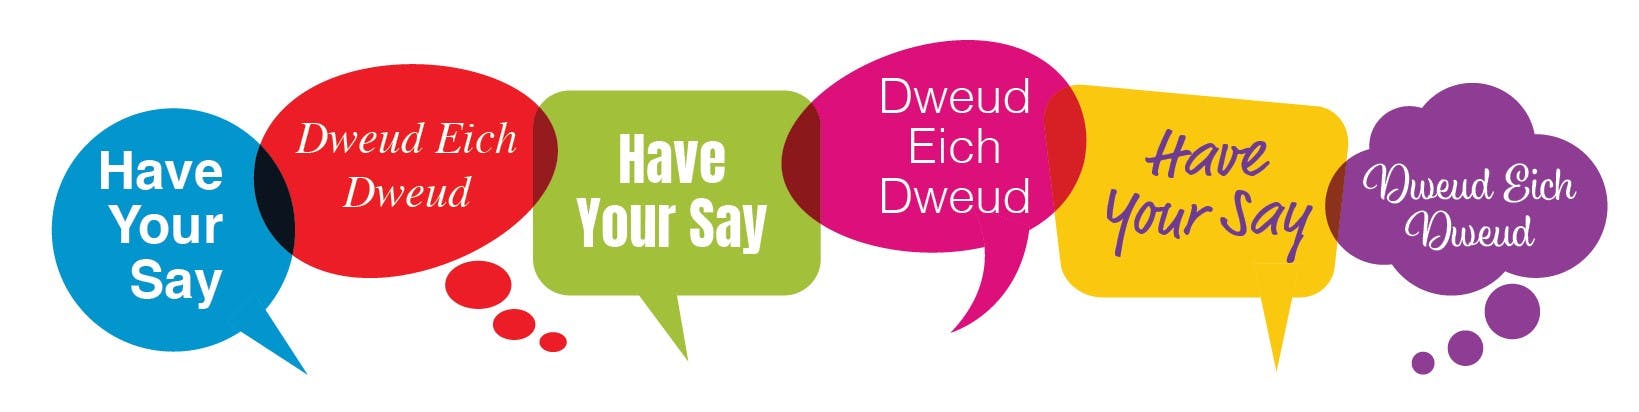 Banner image saying "Dweud eich Dweud" and "Have Your Say"